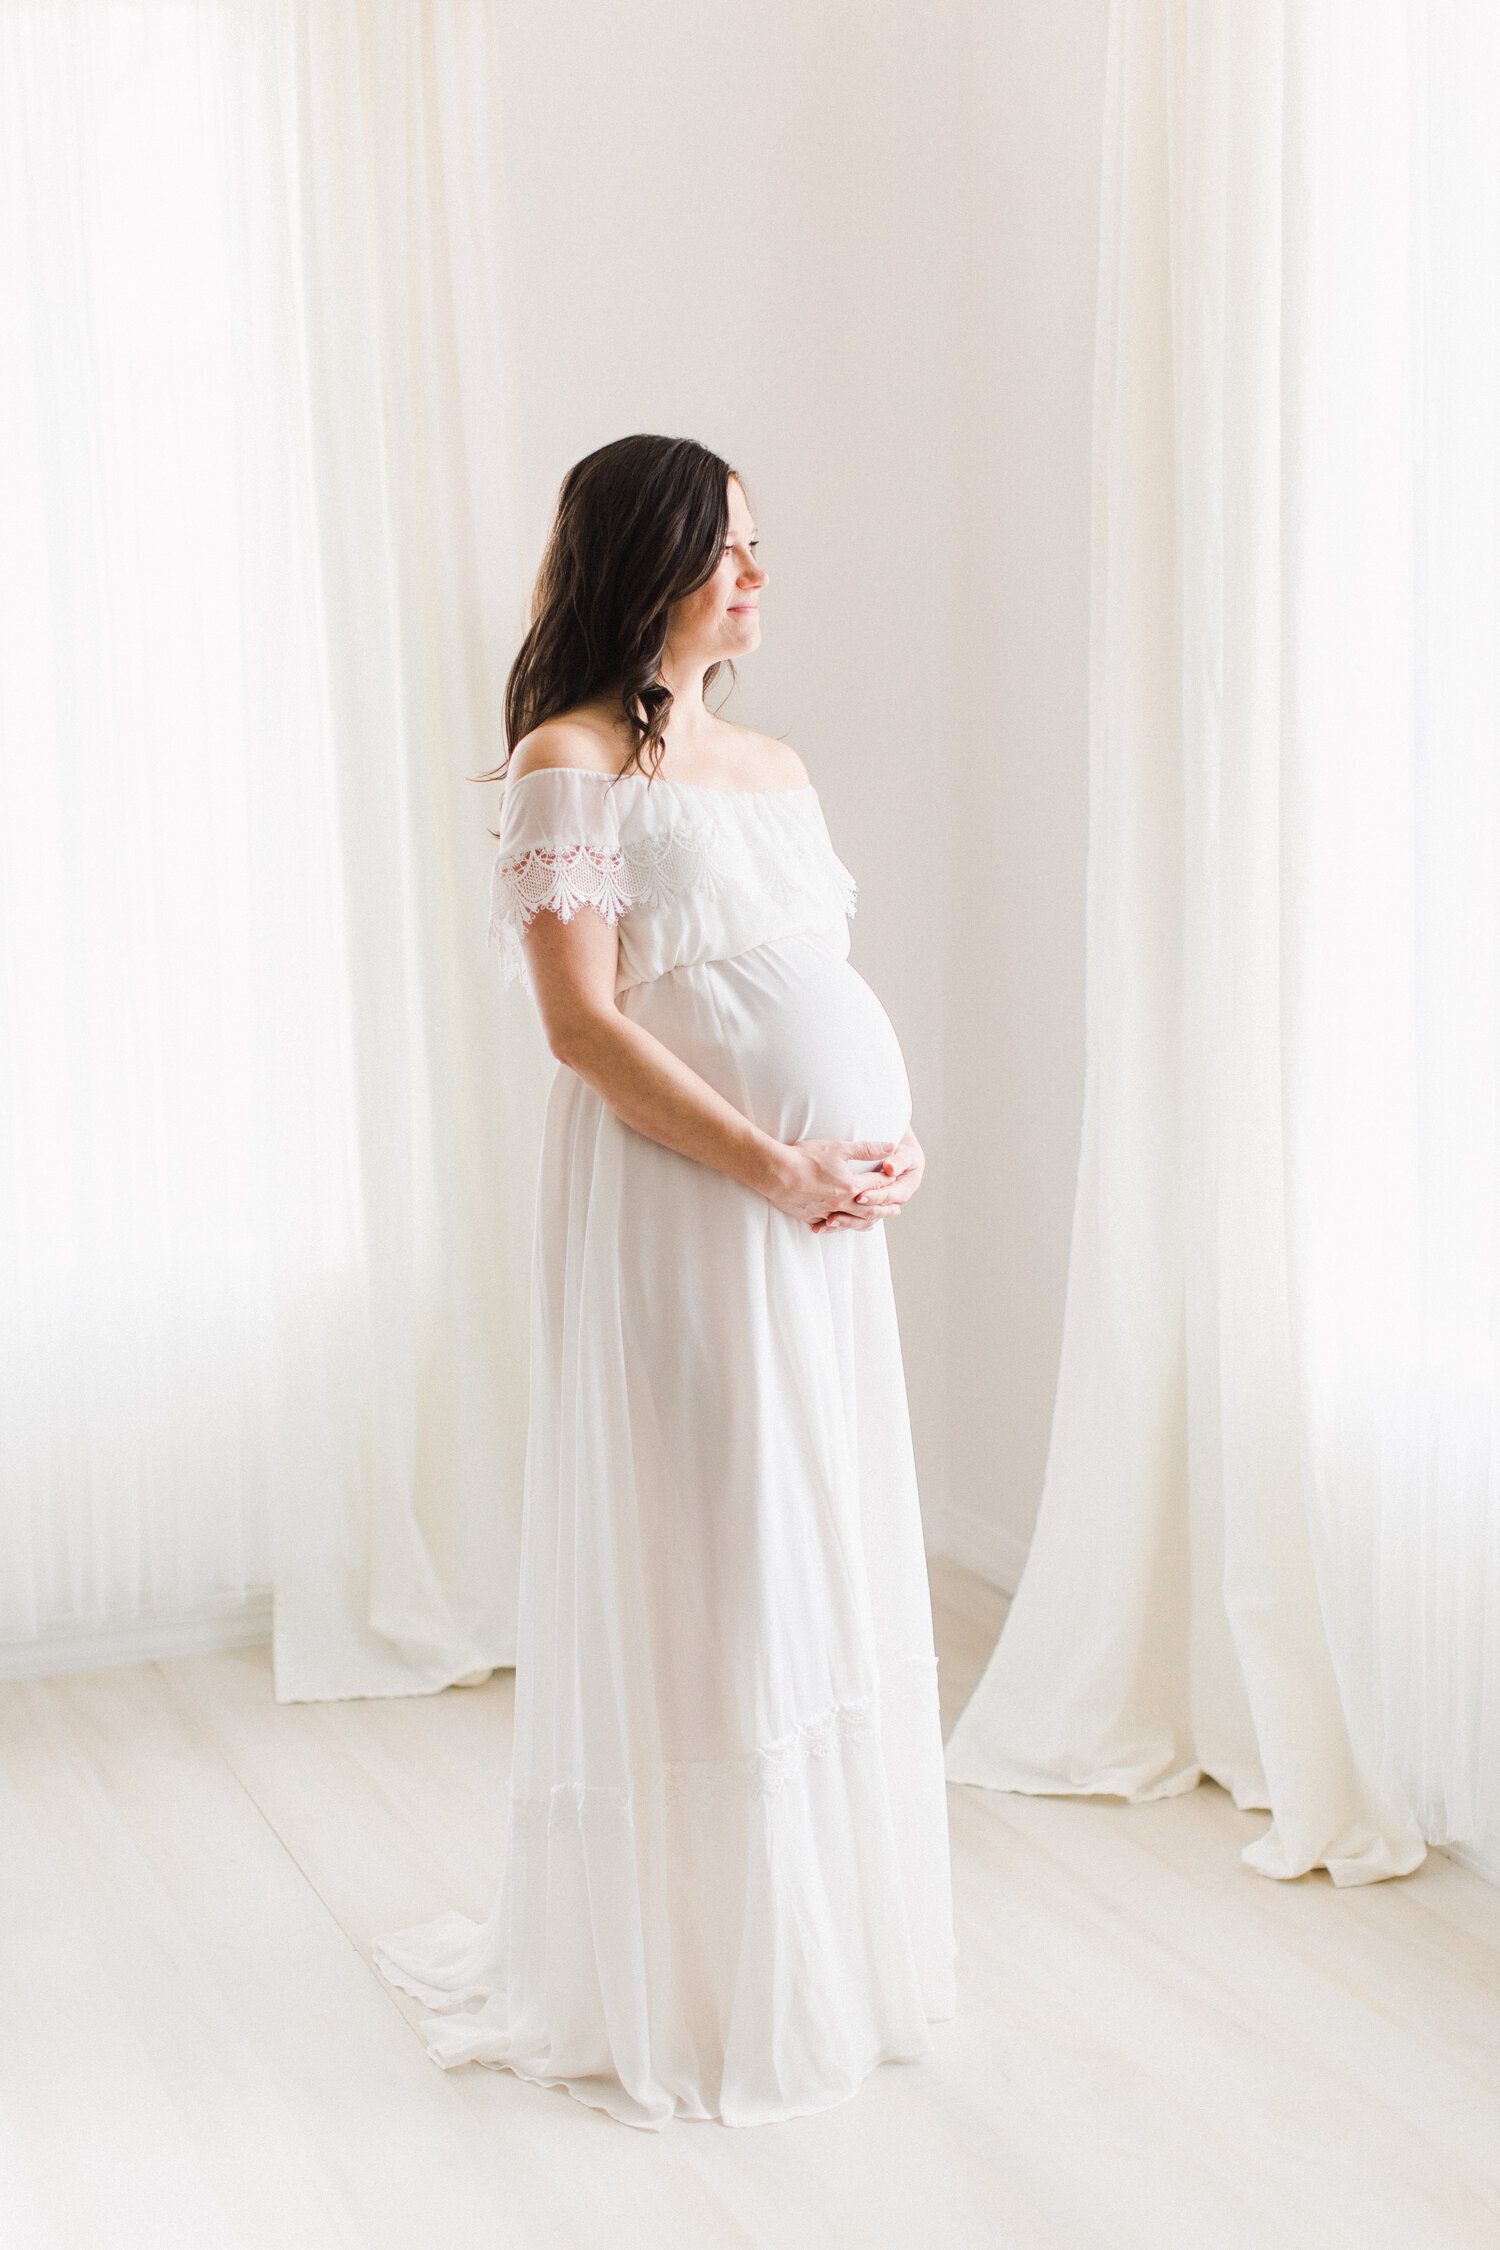 Studio maternity session in BHLDN off the shoulder dress.